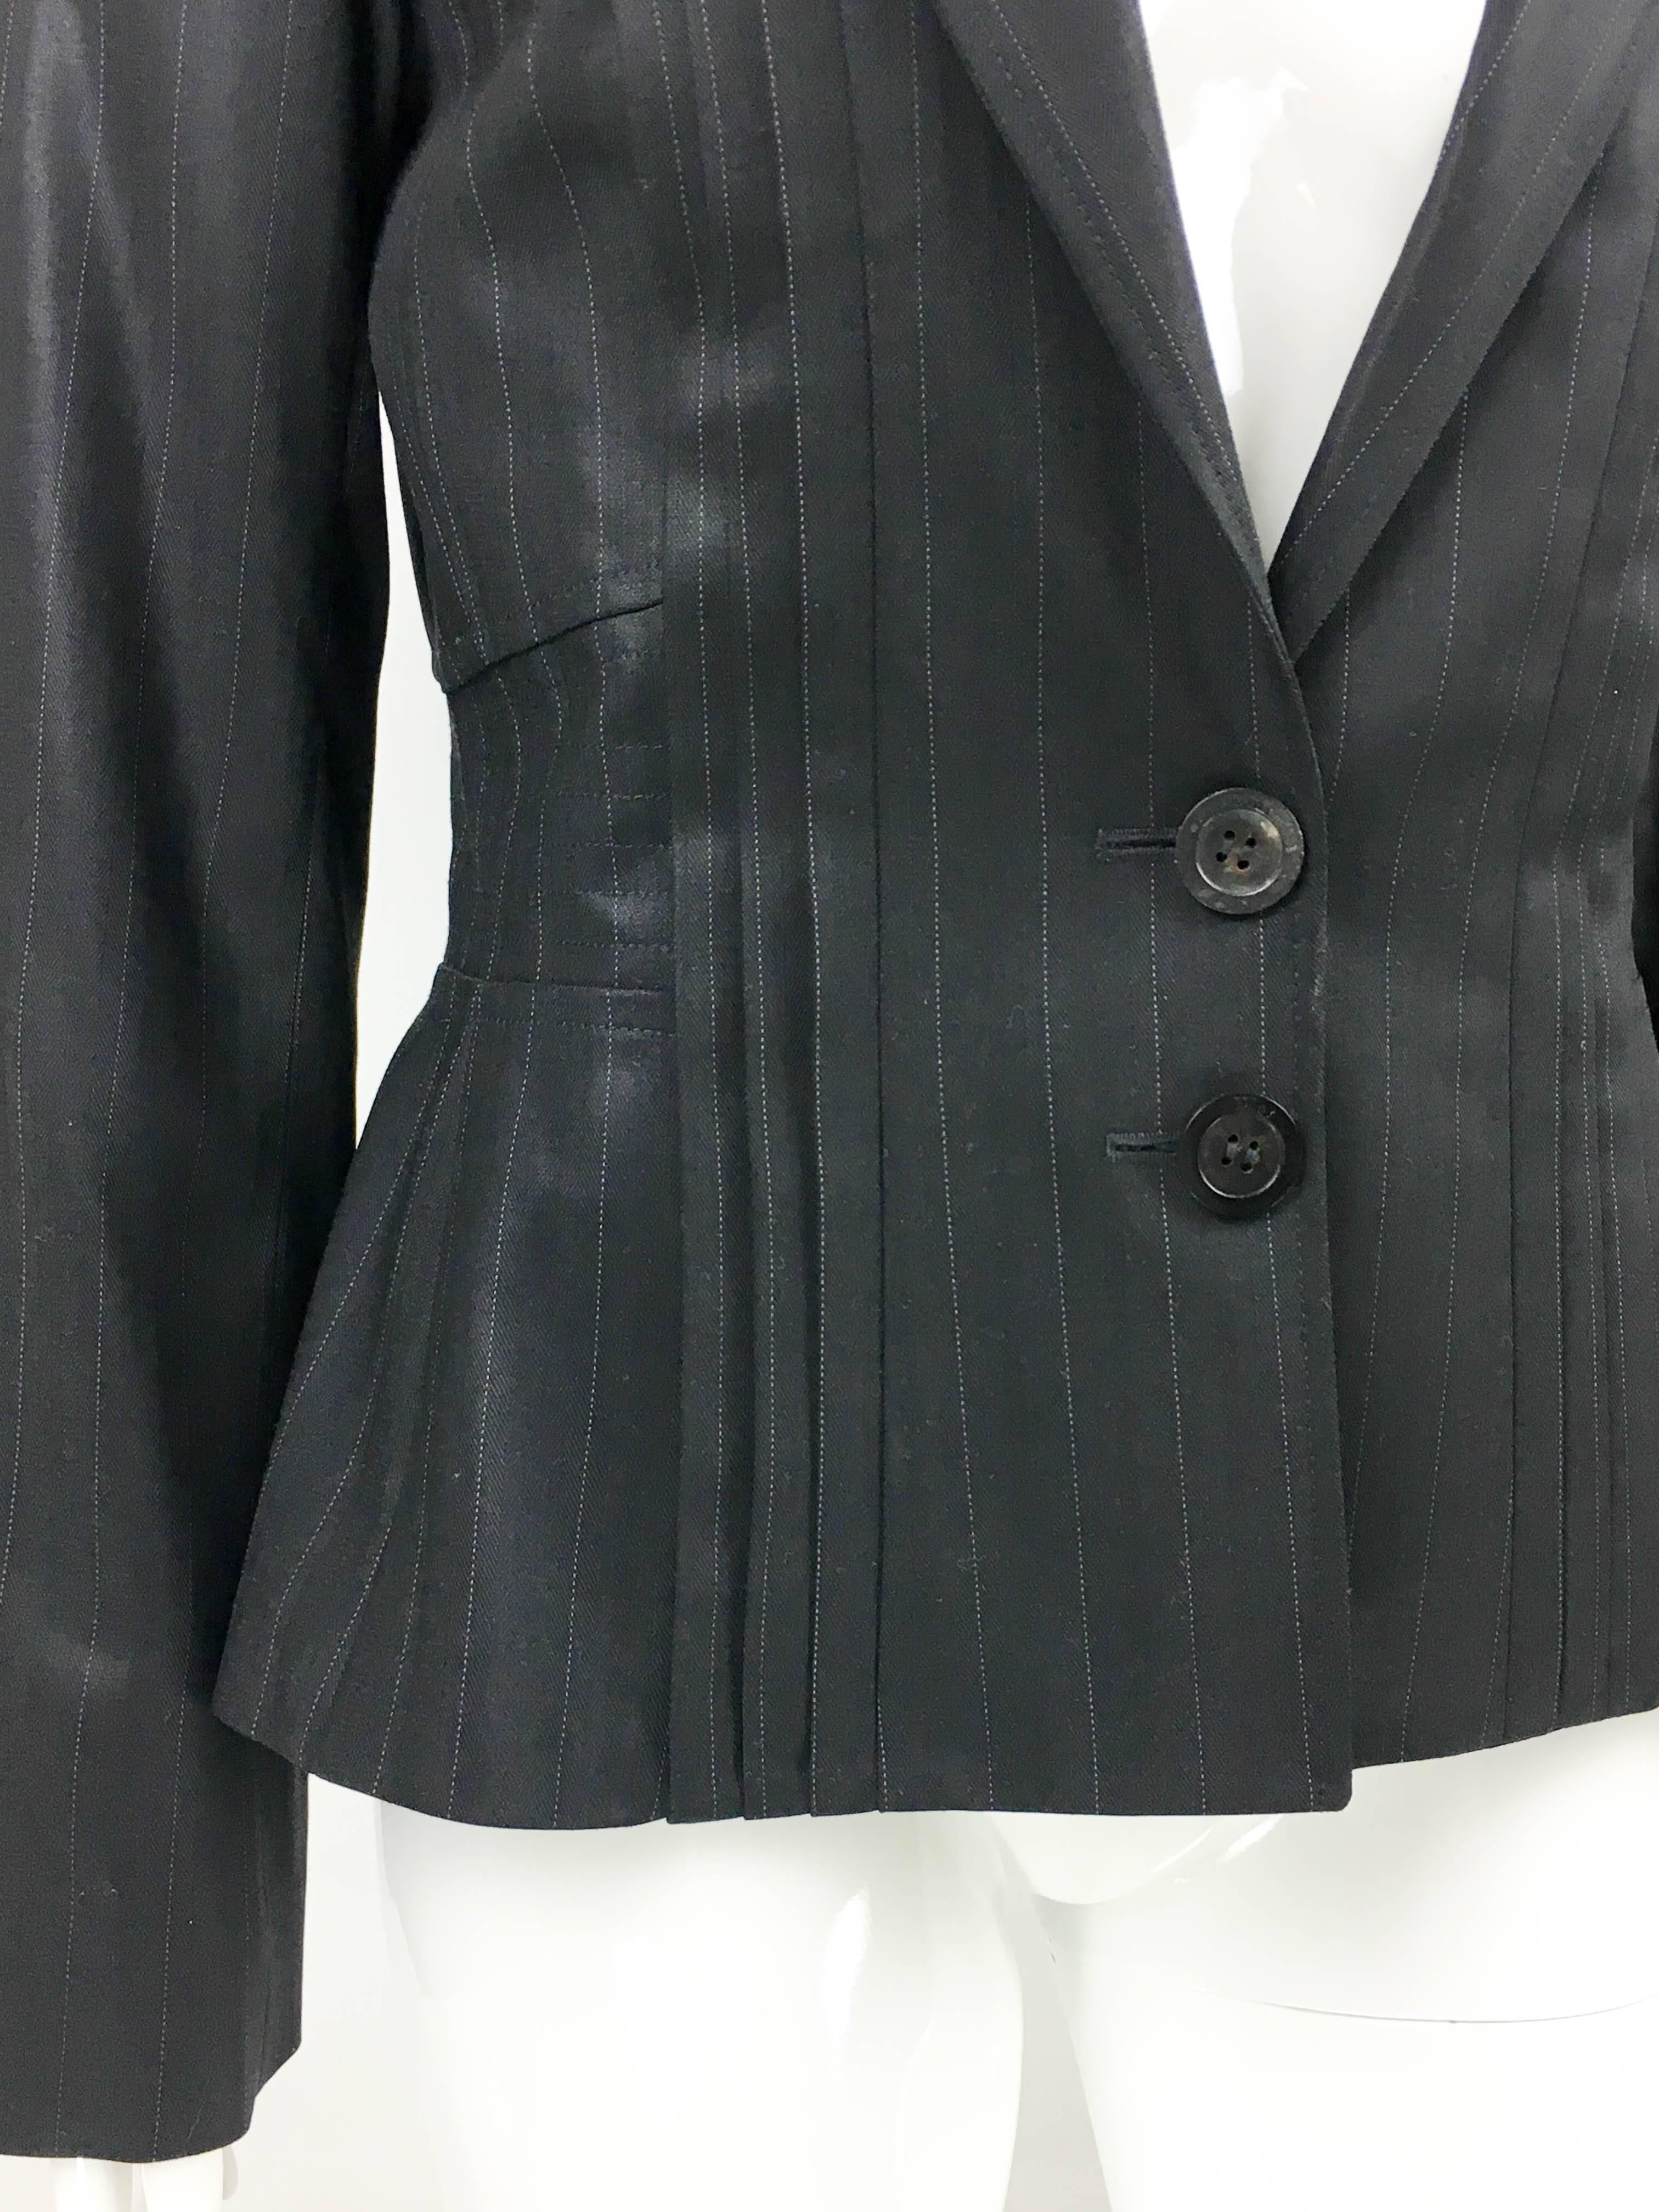 Dior by Galliano Black Pinstripe Pleated Jacket, 2005  4